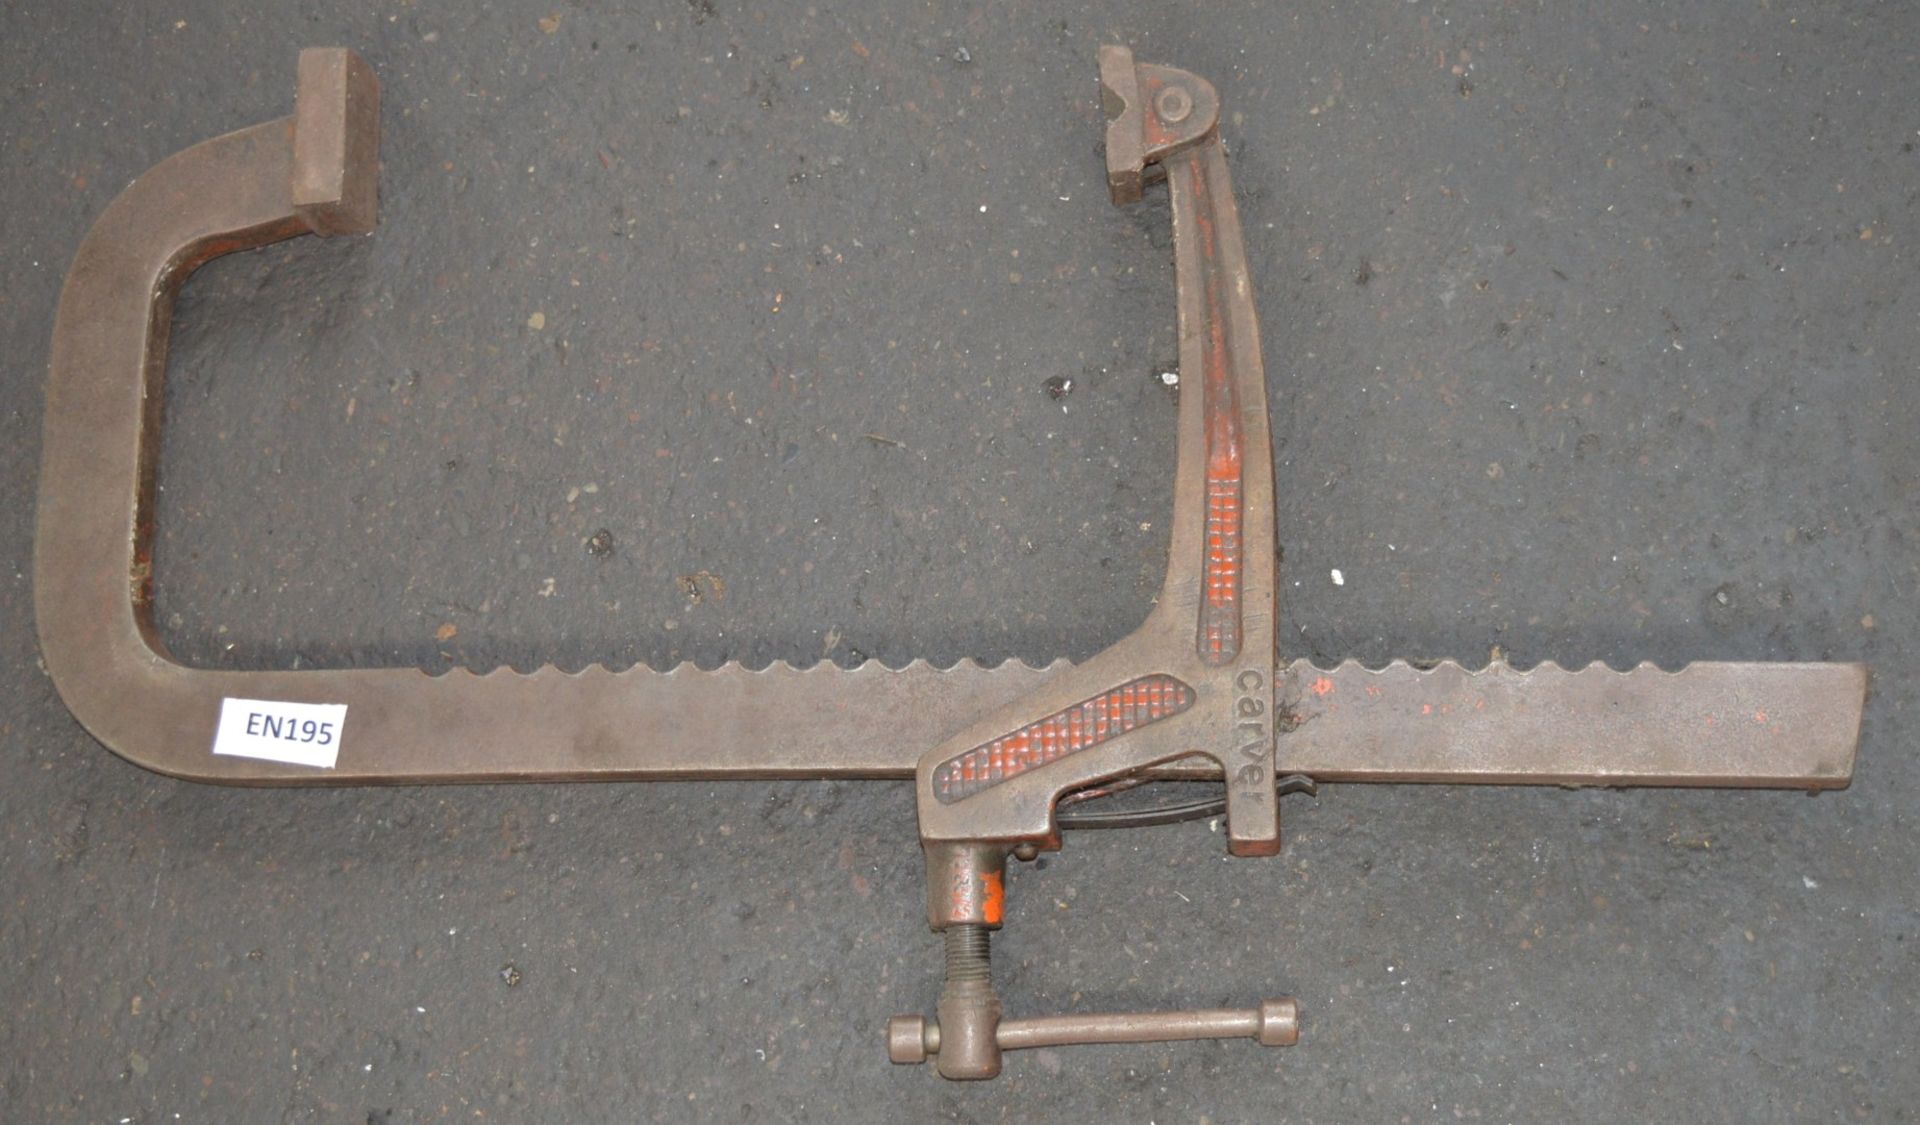 1 x Carver Heavy Duty Clamp - Large Size - Approx 66cm Length - CL202 -  Ref EN195 - Location: - Image 2 of 2